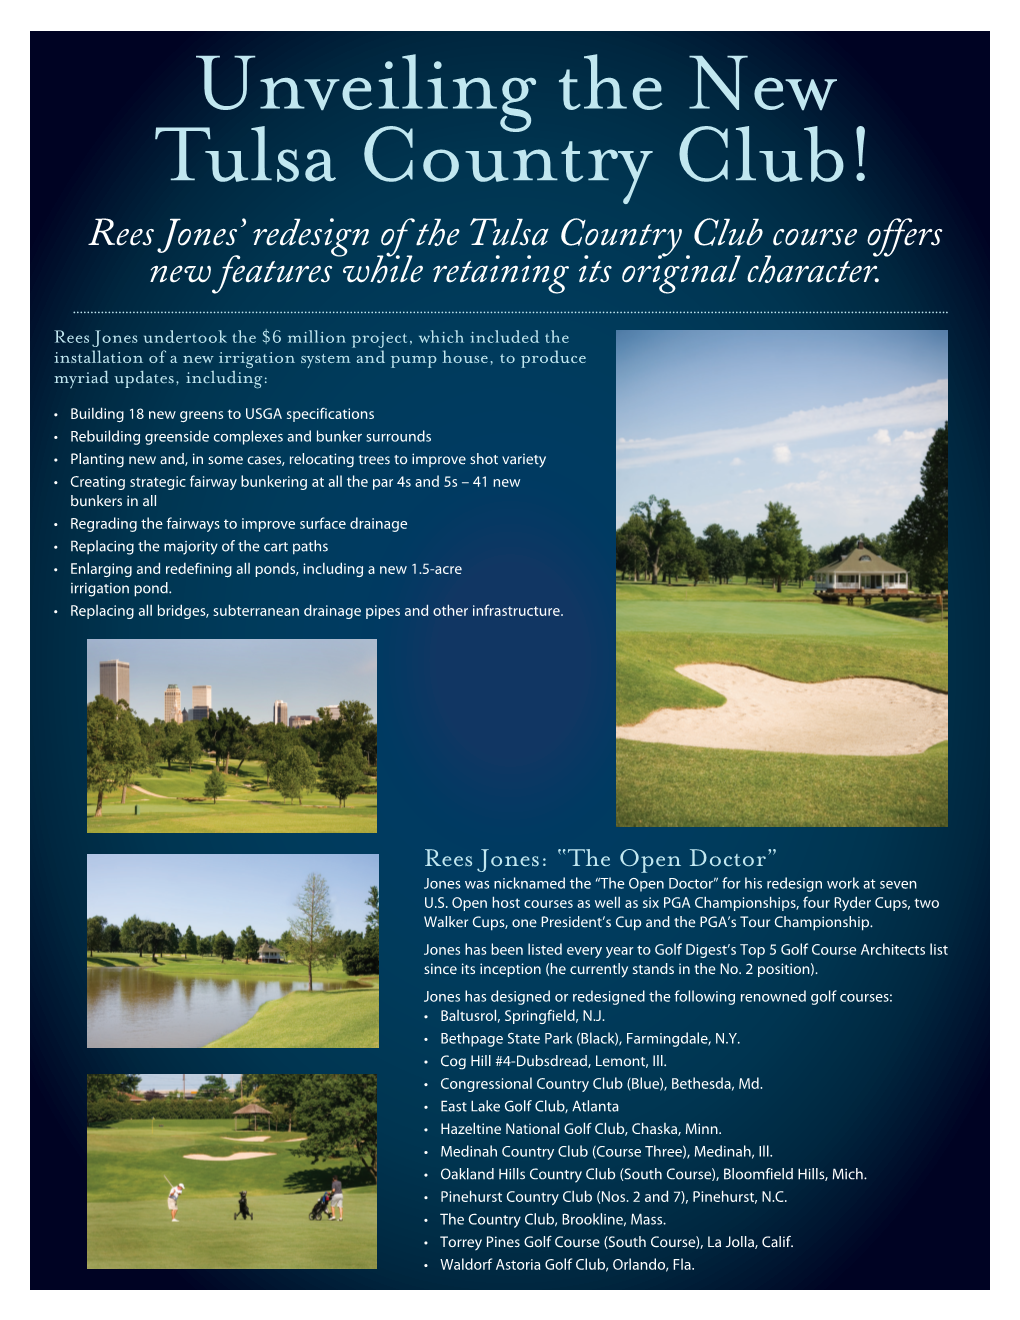 Unveiling the New Tulsa Country Club! Rees Jones’ Redesign of the Tulsa Country Club Course Offers New Features While Retaining Its Original Character